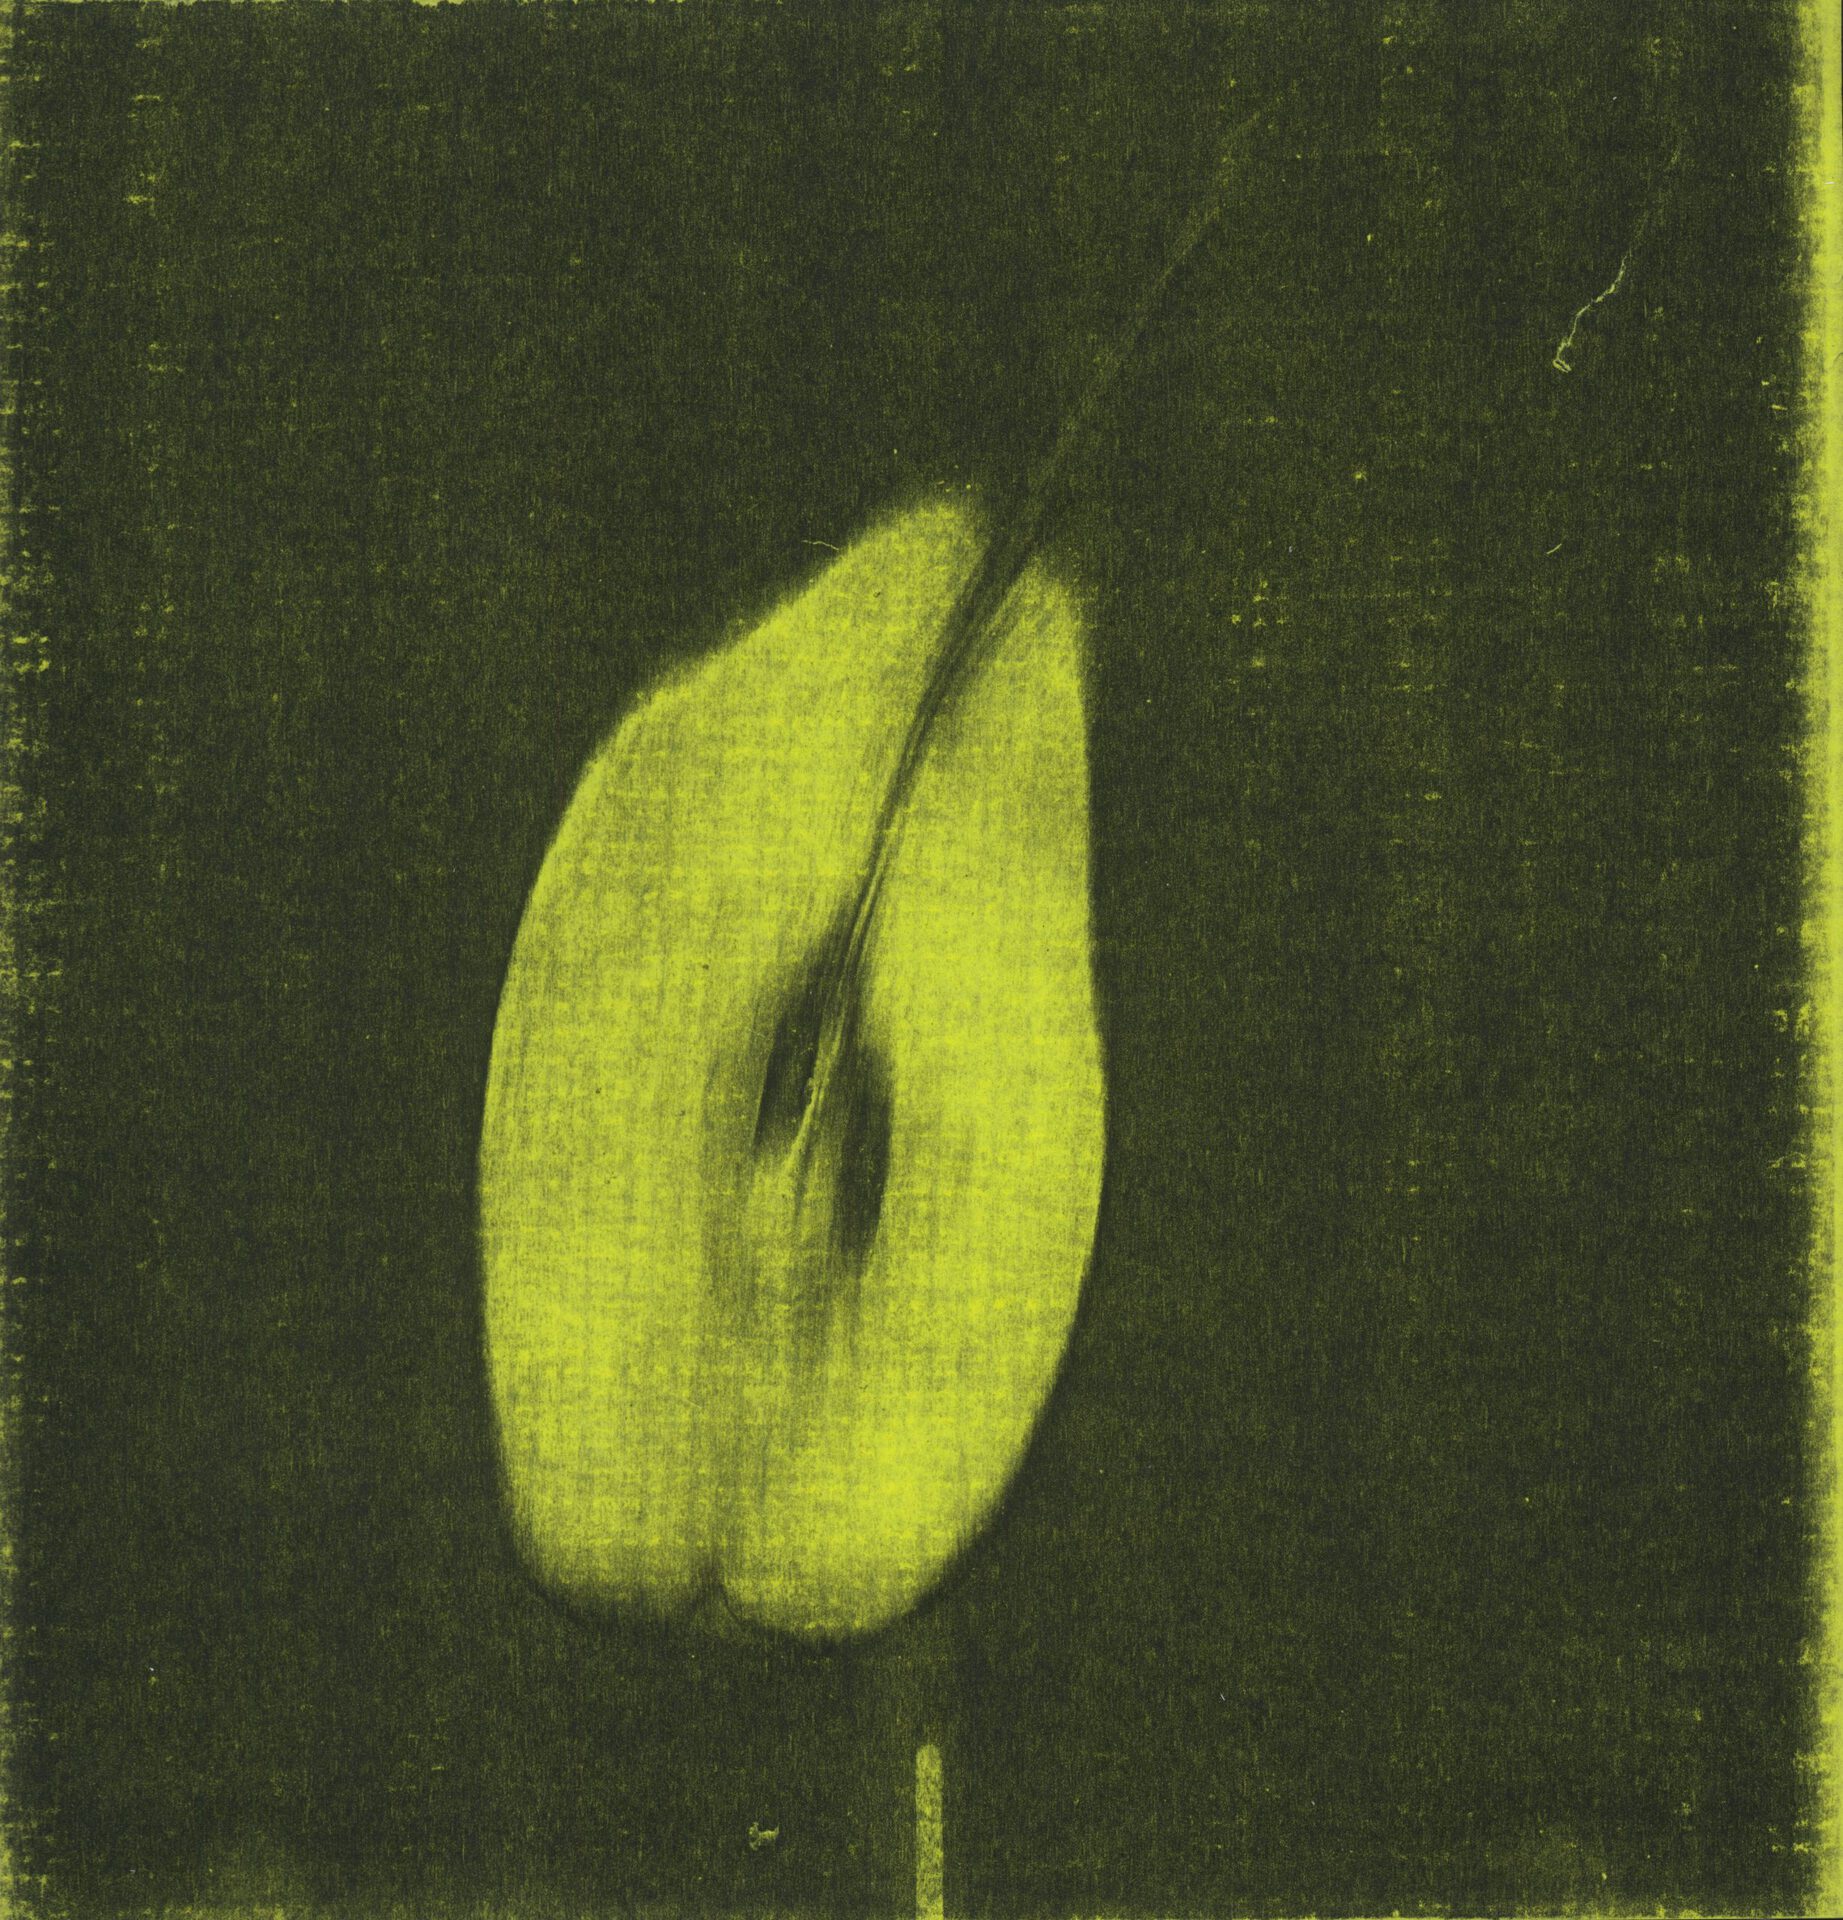 Pati Hill, Untitled (pear), c.1976, photocopy on green paper, 23 x 21,7 cm